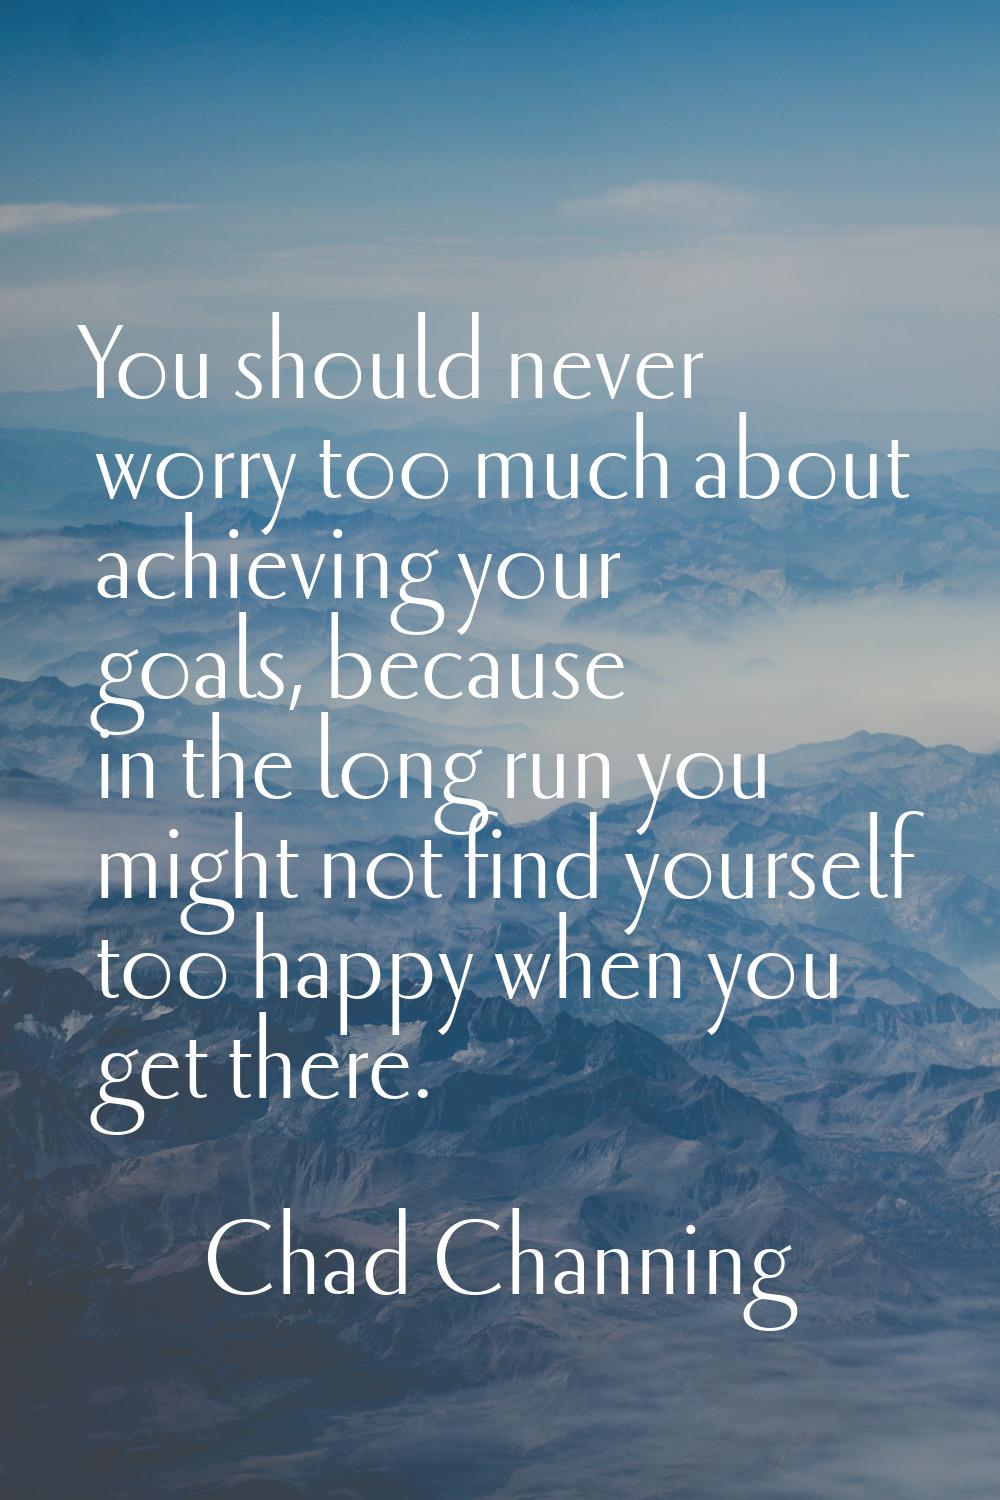 You should never worry too much about achieving your goals, because in the long run you might not f